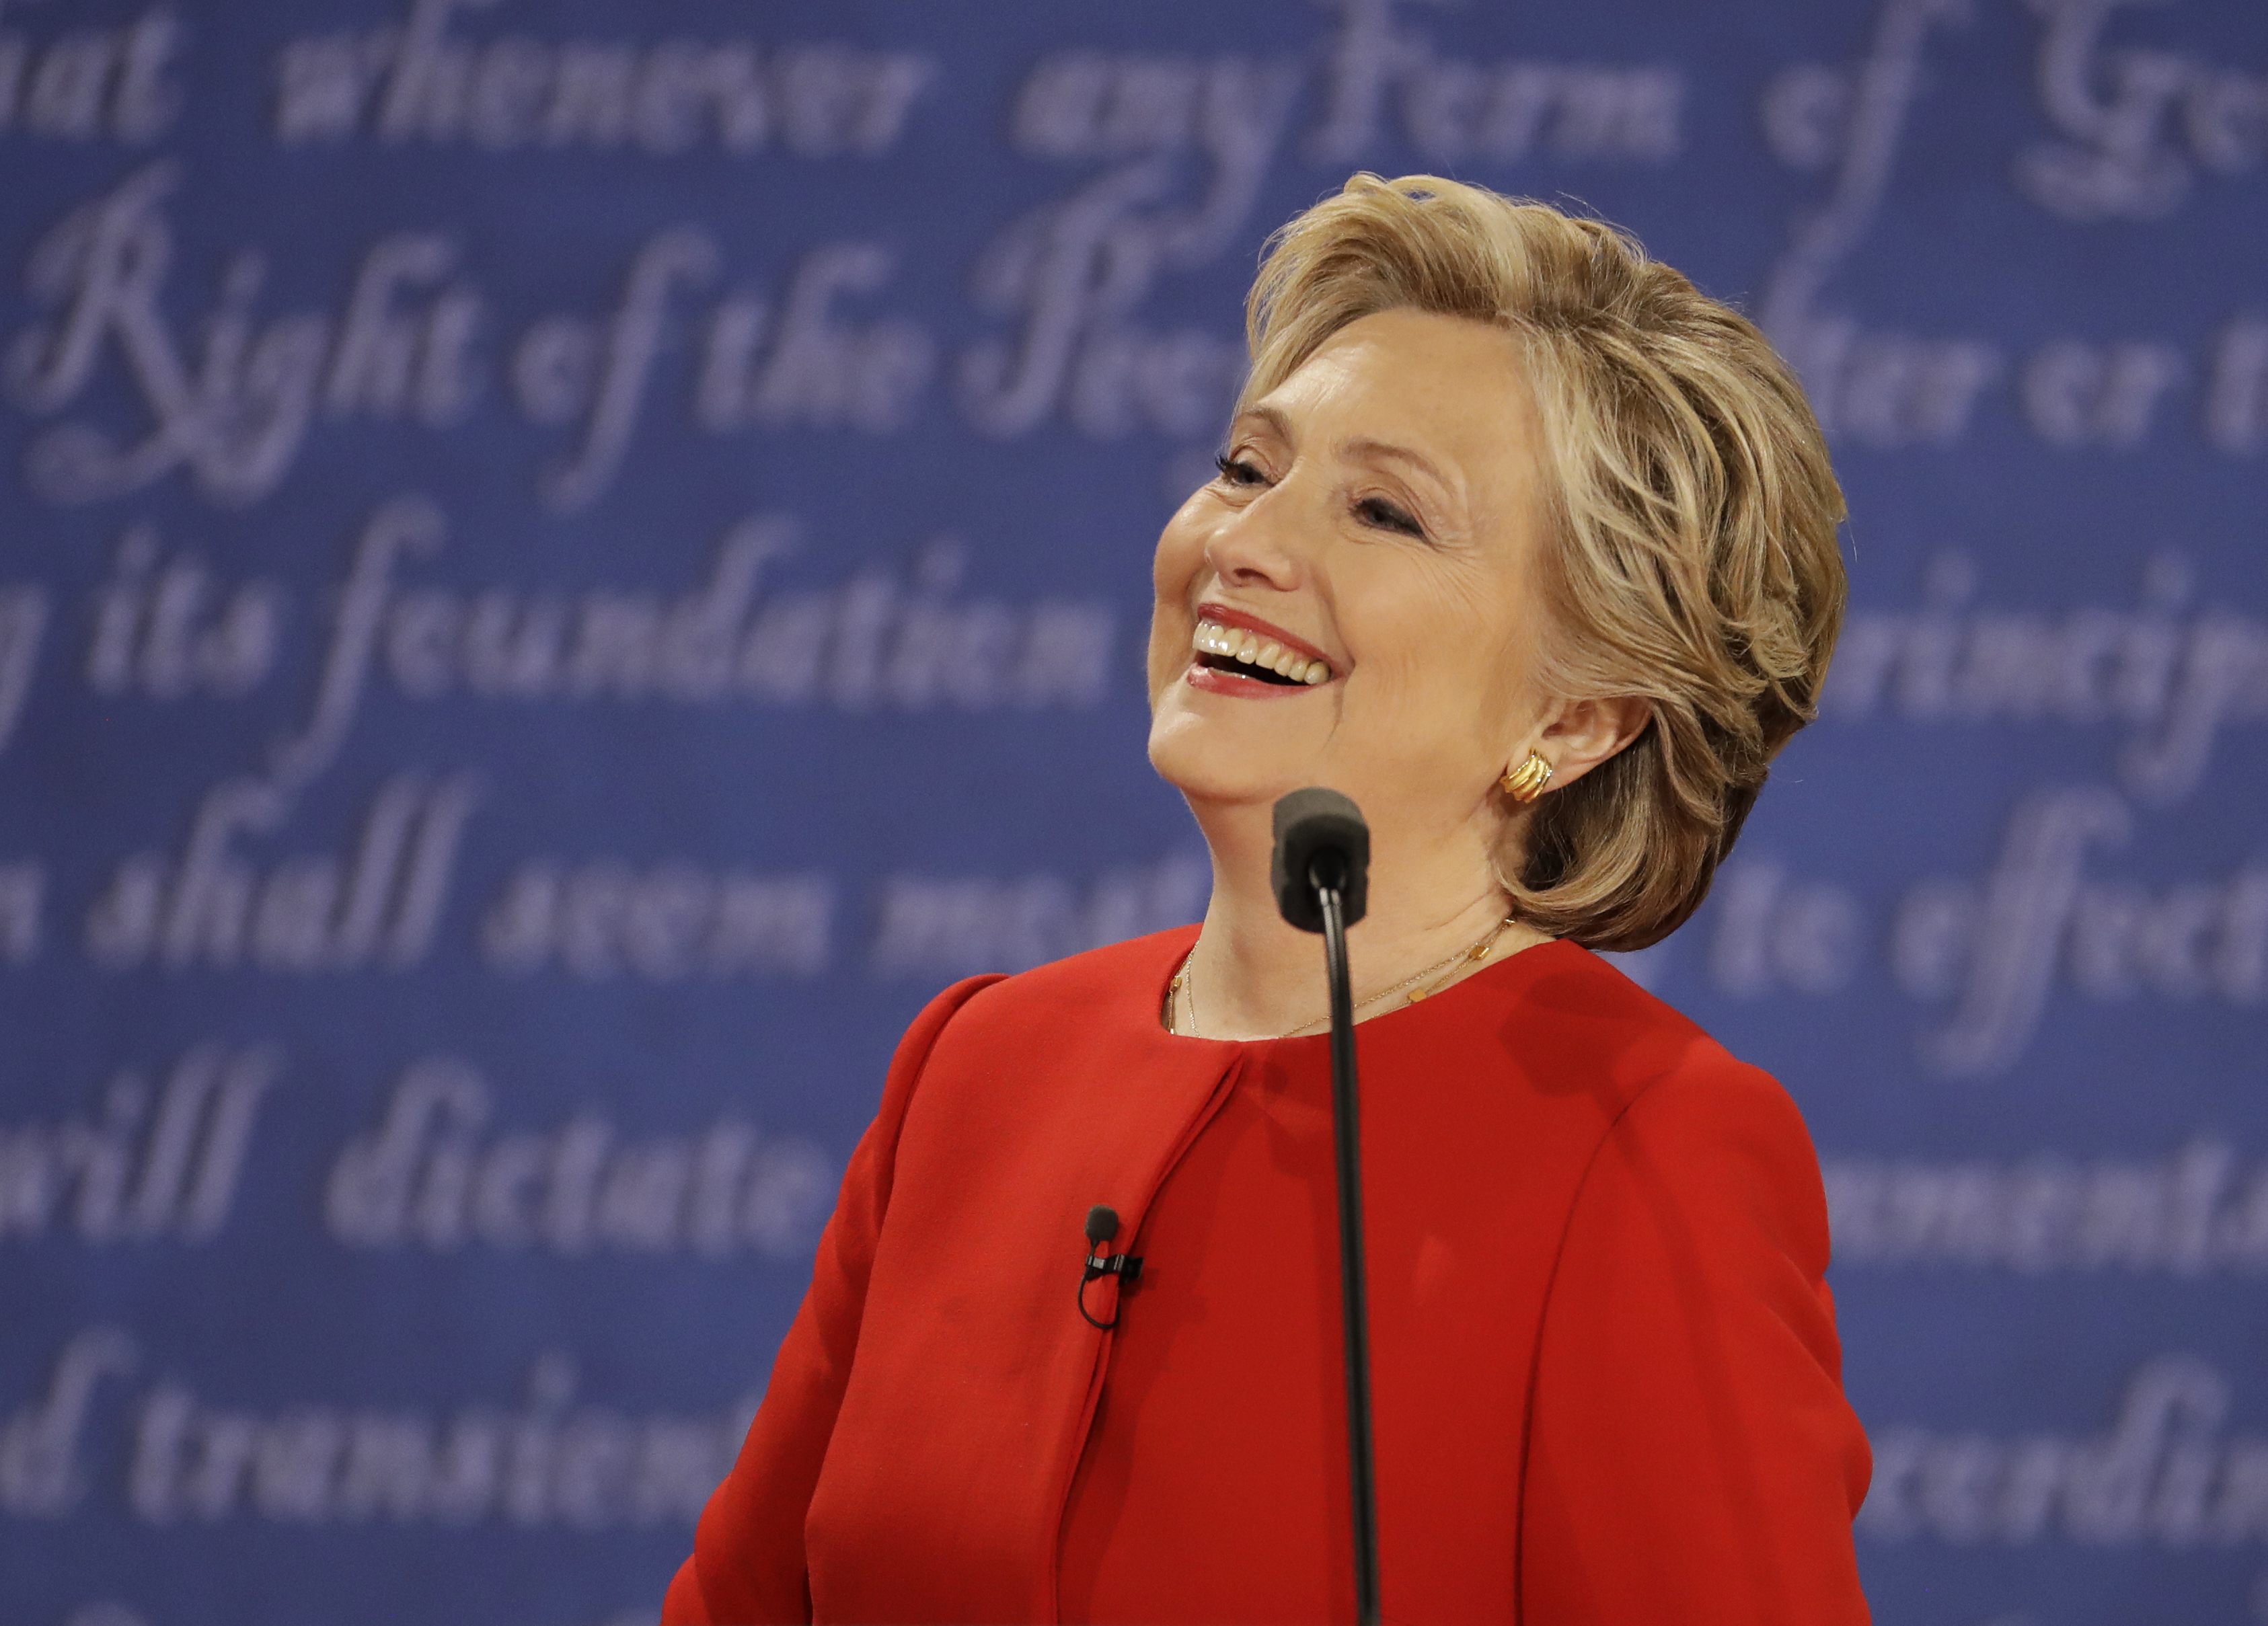 Democratic presidential nominee Hillary Clinton laughs to Republican presidential nominee Donald Trump during the presidential debate at Hofstra University in Hempstead, N.Y., Monday, Sept. 26, 2016. (Julio Cortez, Associated Press)